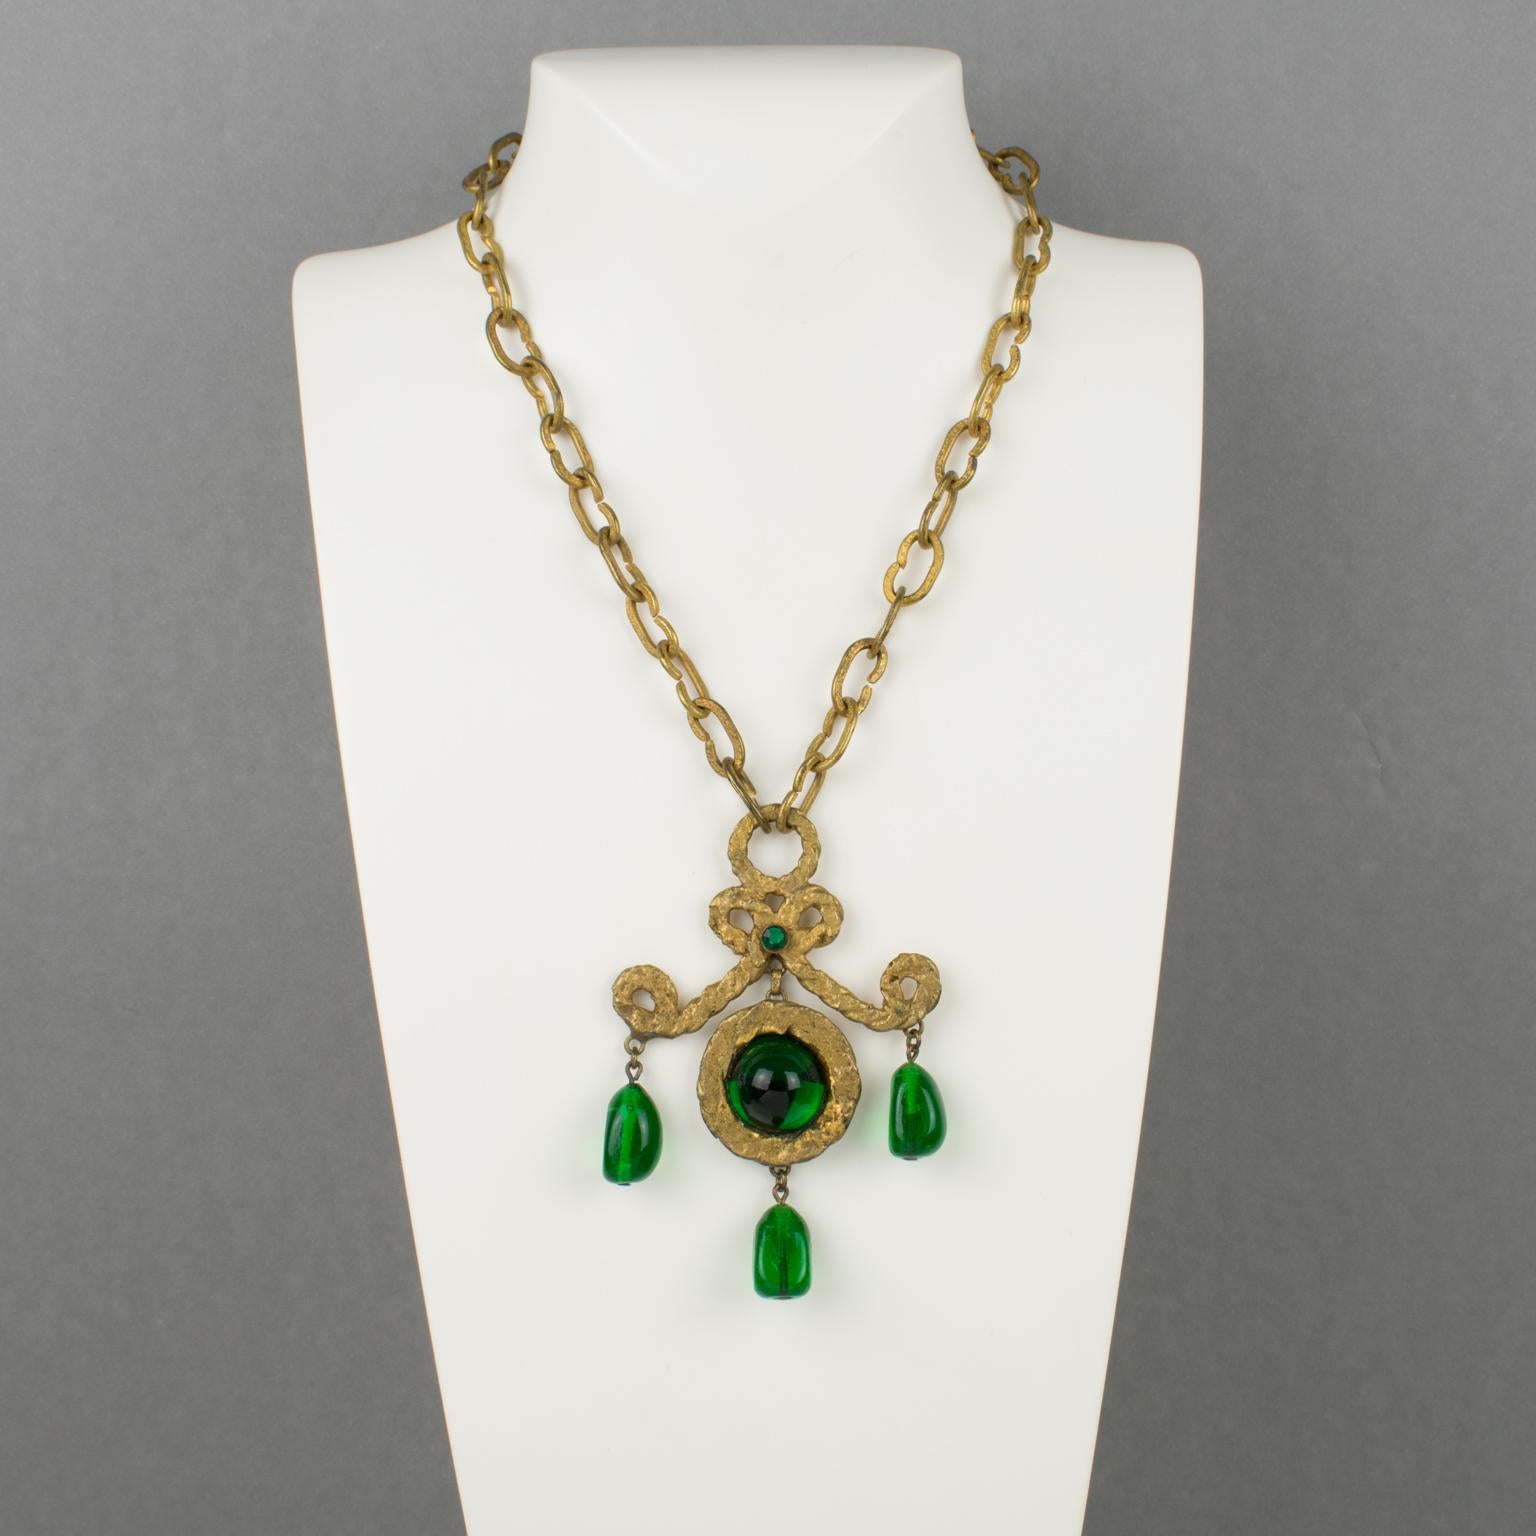 Medieval Henry Perichon Gilded Bronze Necklace with Green Poured Glass Beads